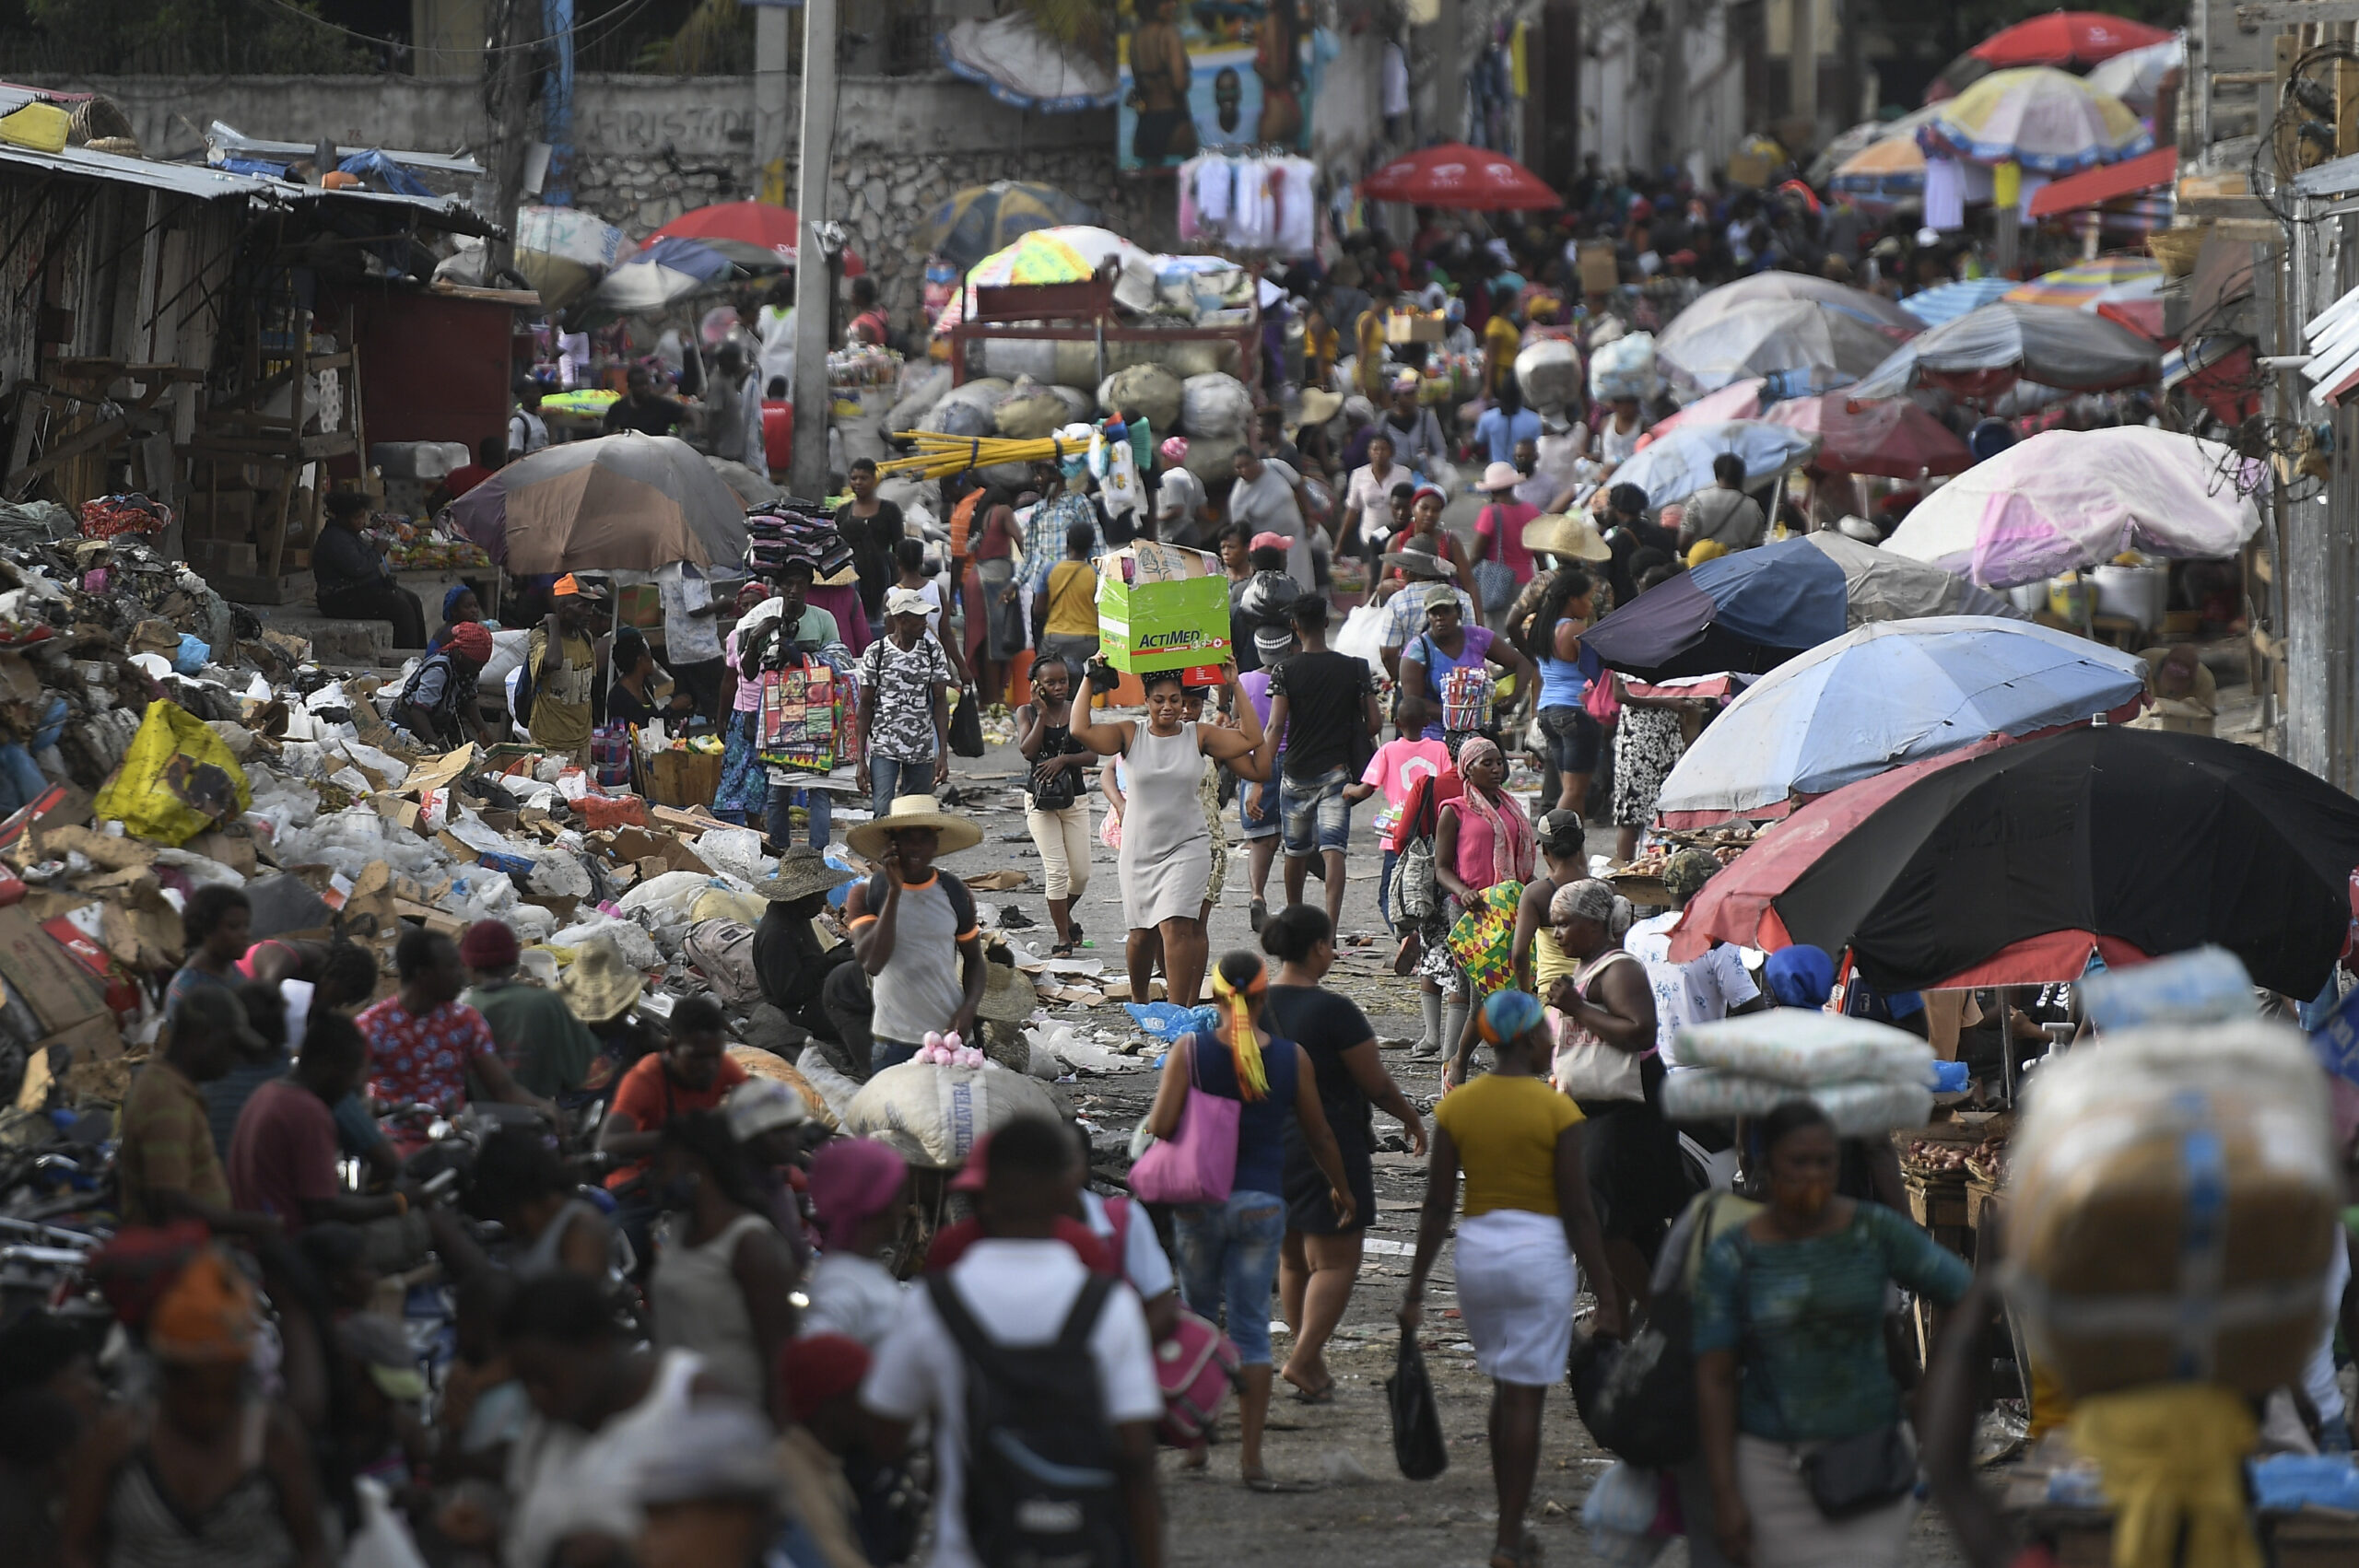 A woman carries a basin with her belongings at the Petion-Ville market in Port-au-Prince, Haiti, Sunday, July 11, 2021, four days after the assassination of Haitian President Jovenel Moise. (AP Photo/Matias Delacroix)